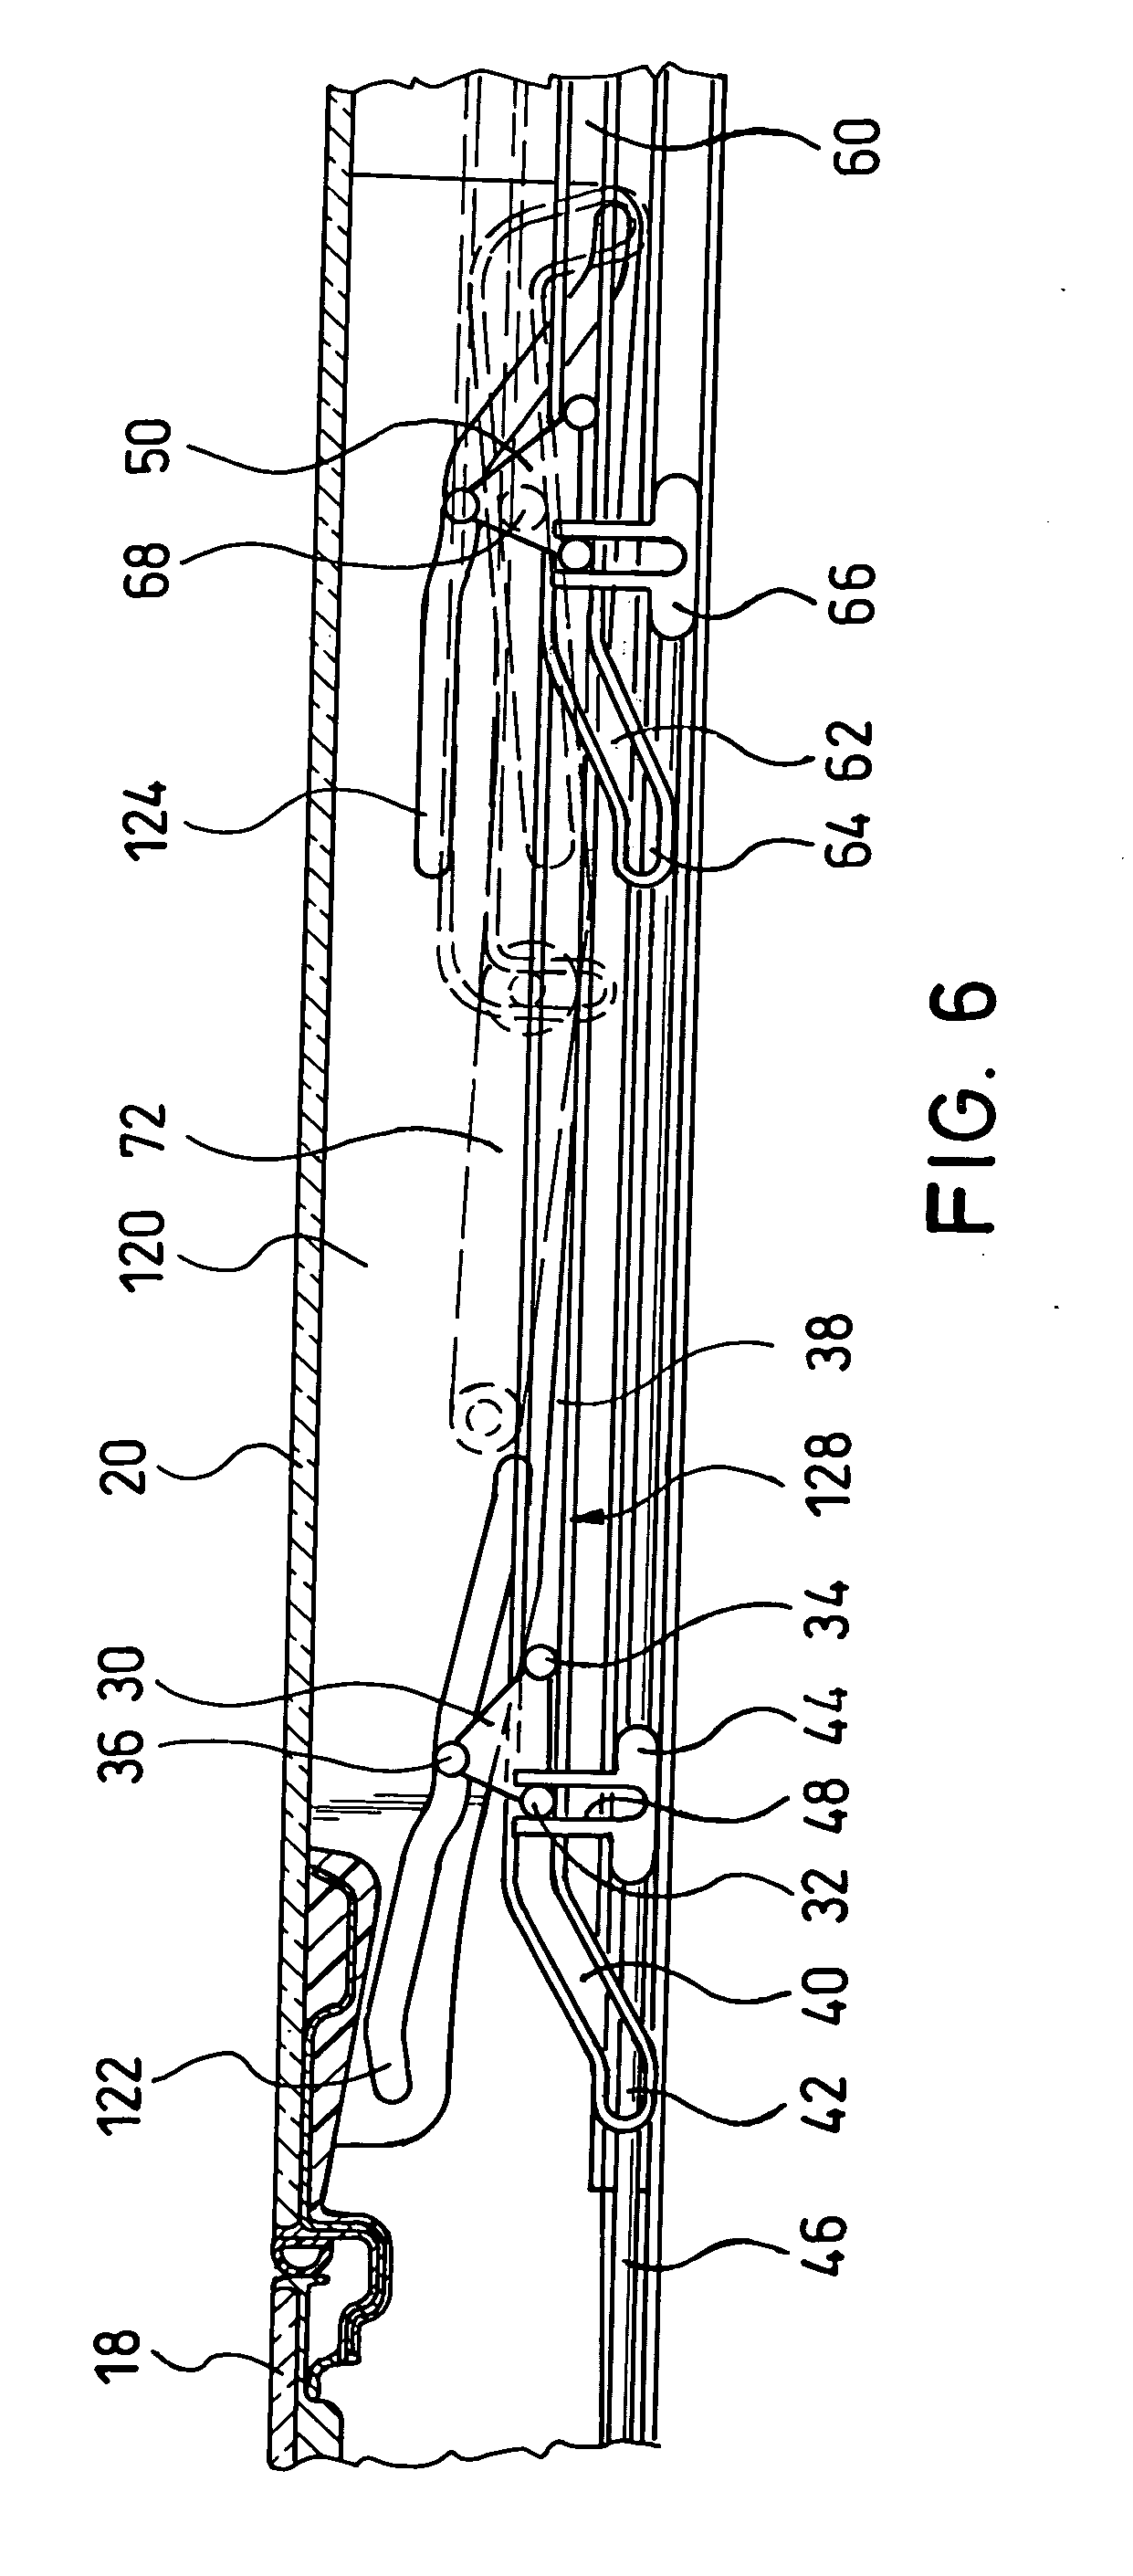 Motor vehicle roof with two openable covers